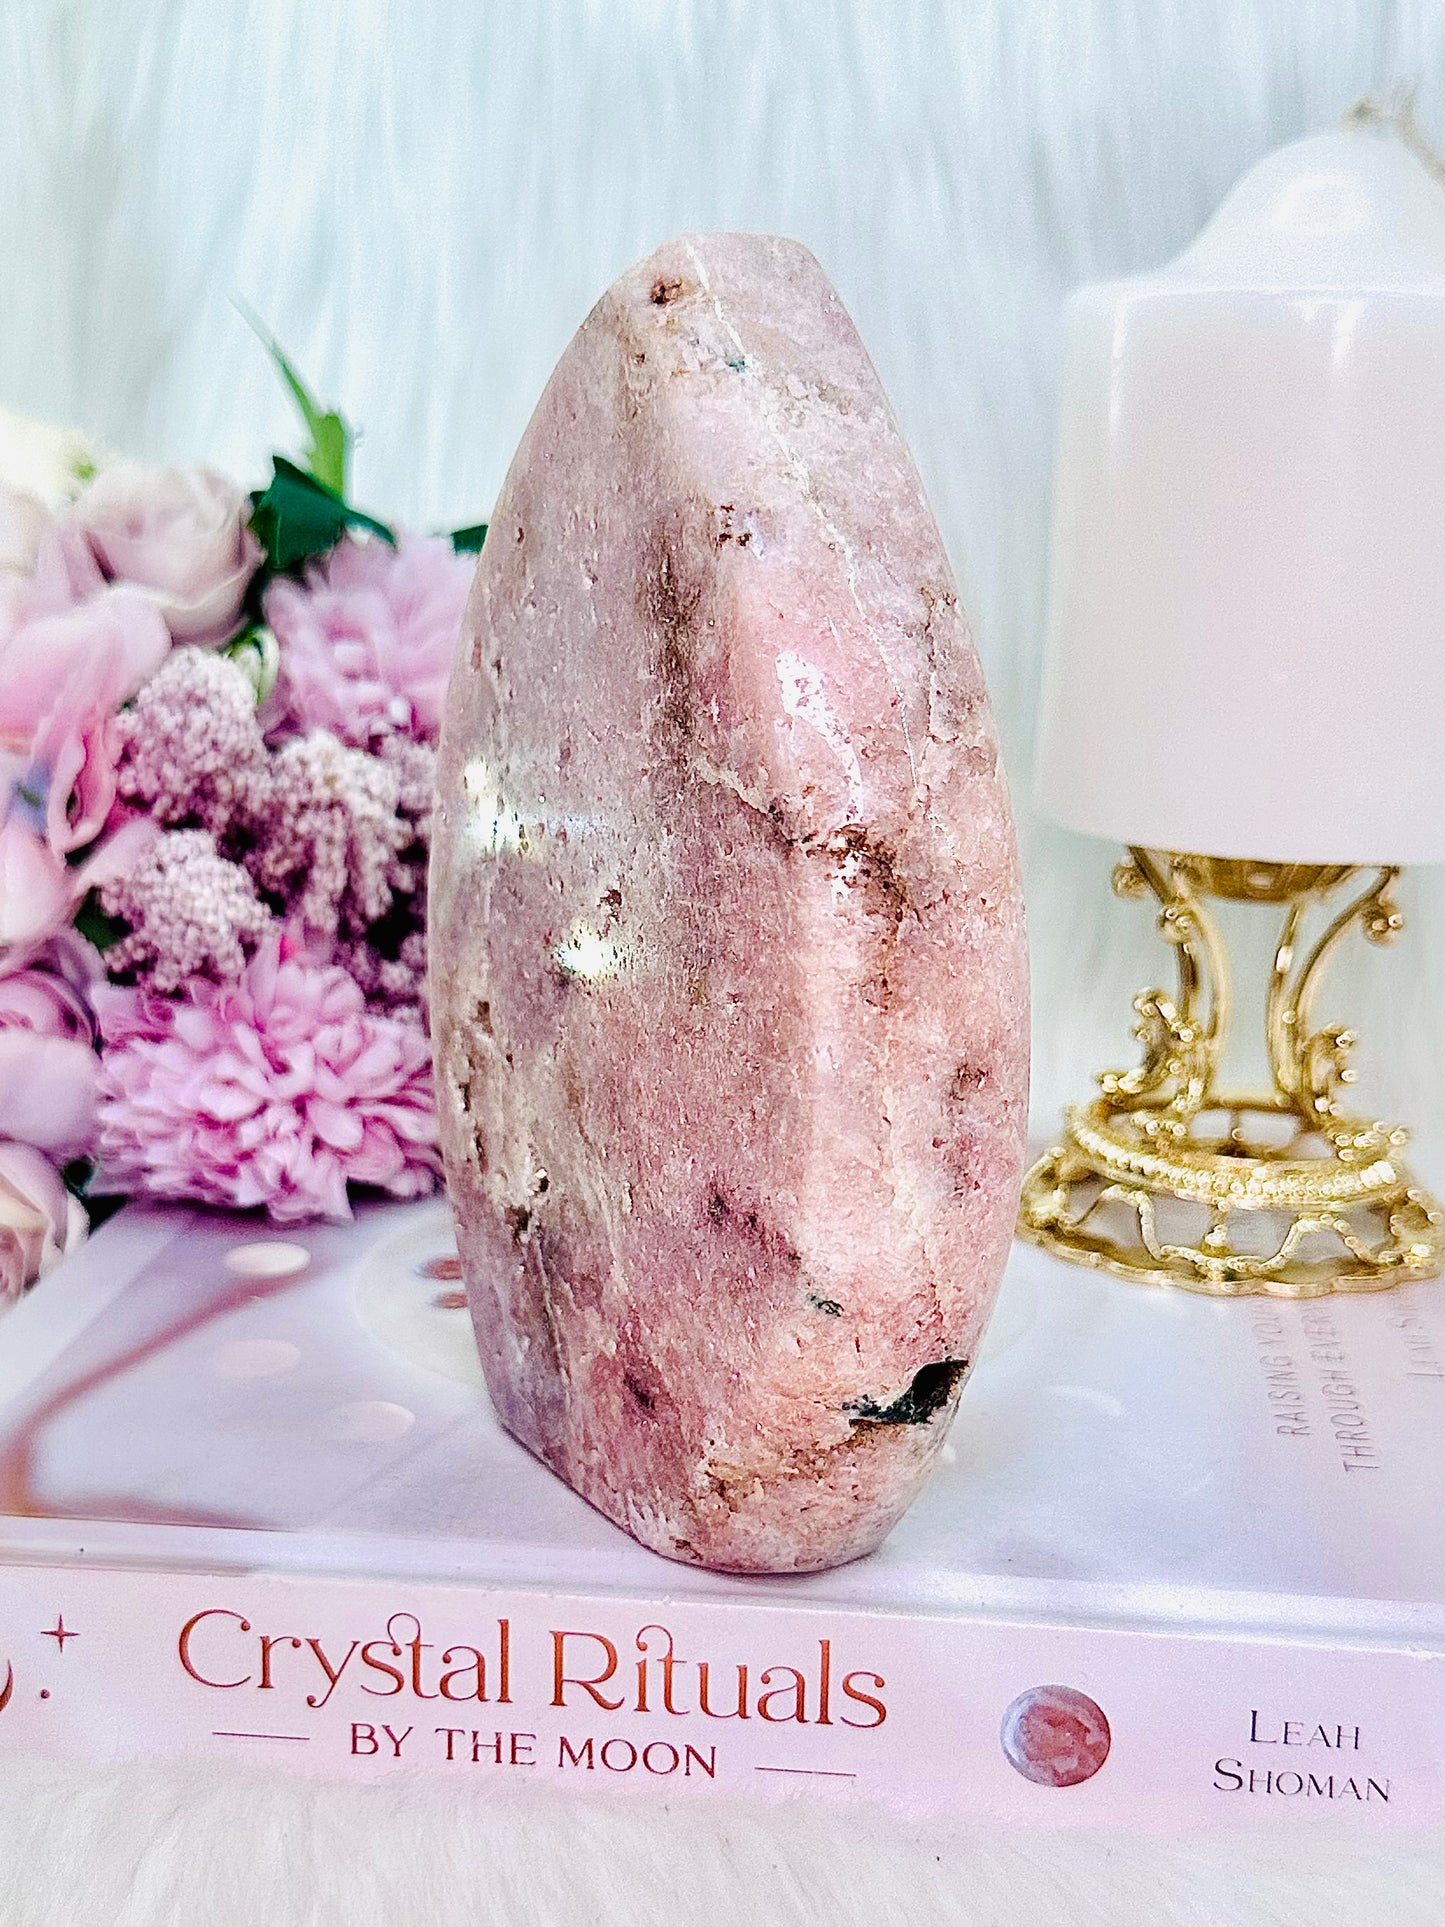 Simply Stunning Large Pink Amethyst Druzy Carved Flame From Brazil 655grams